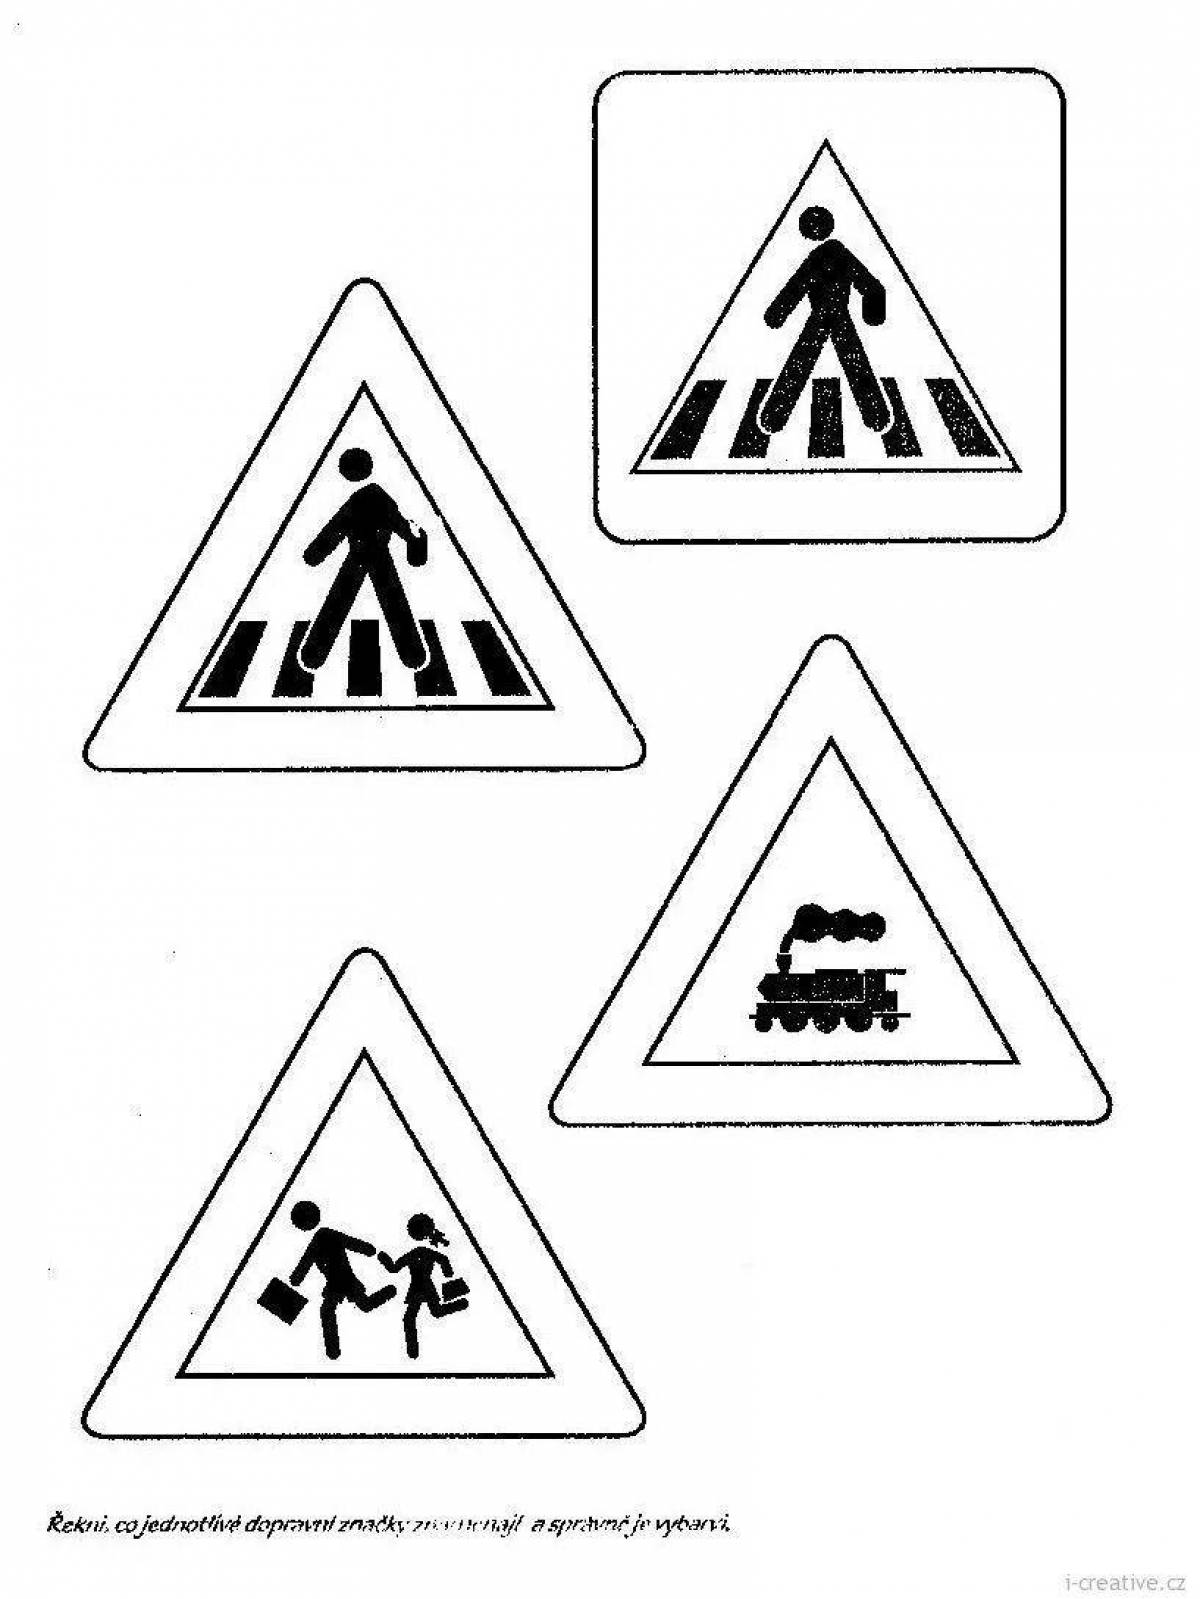 Coloring page with warning sign